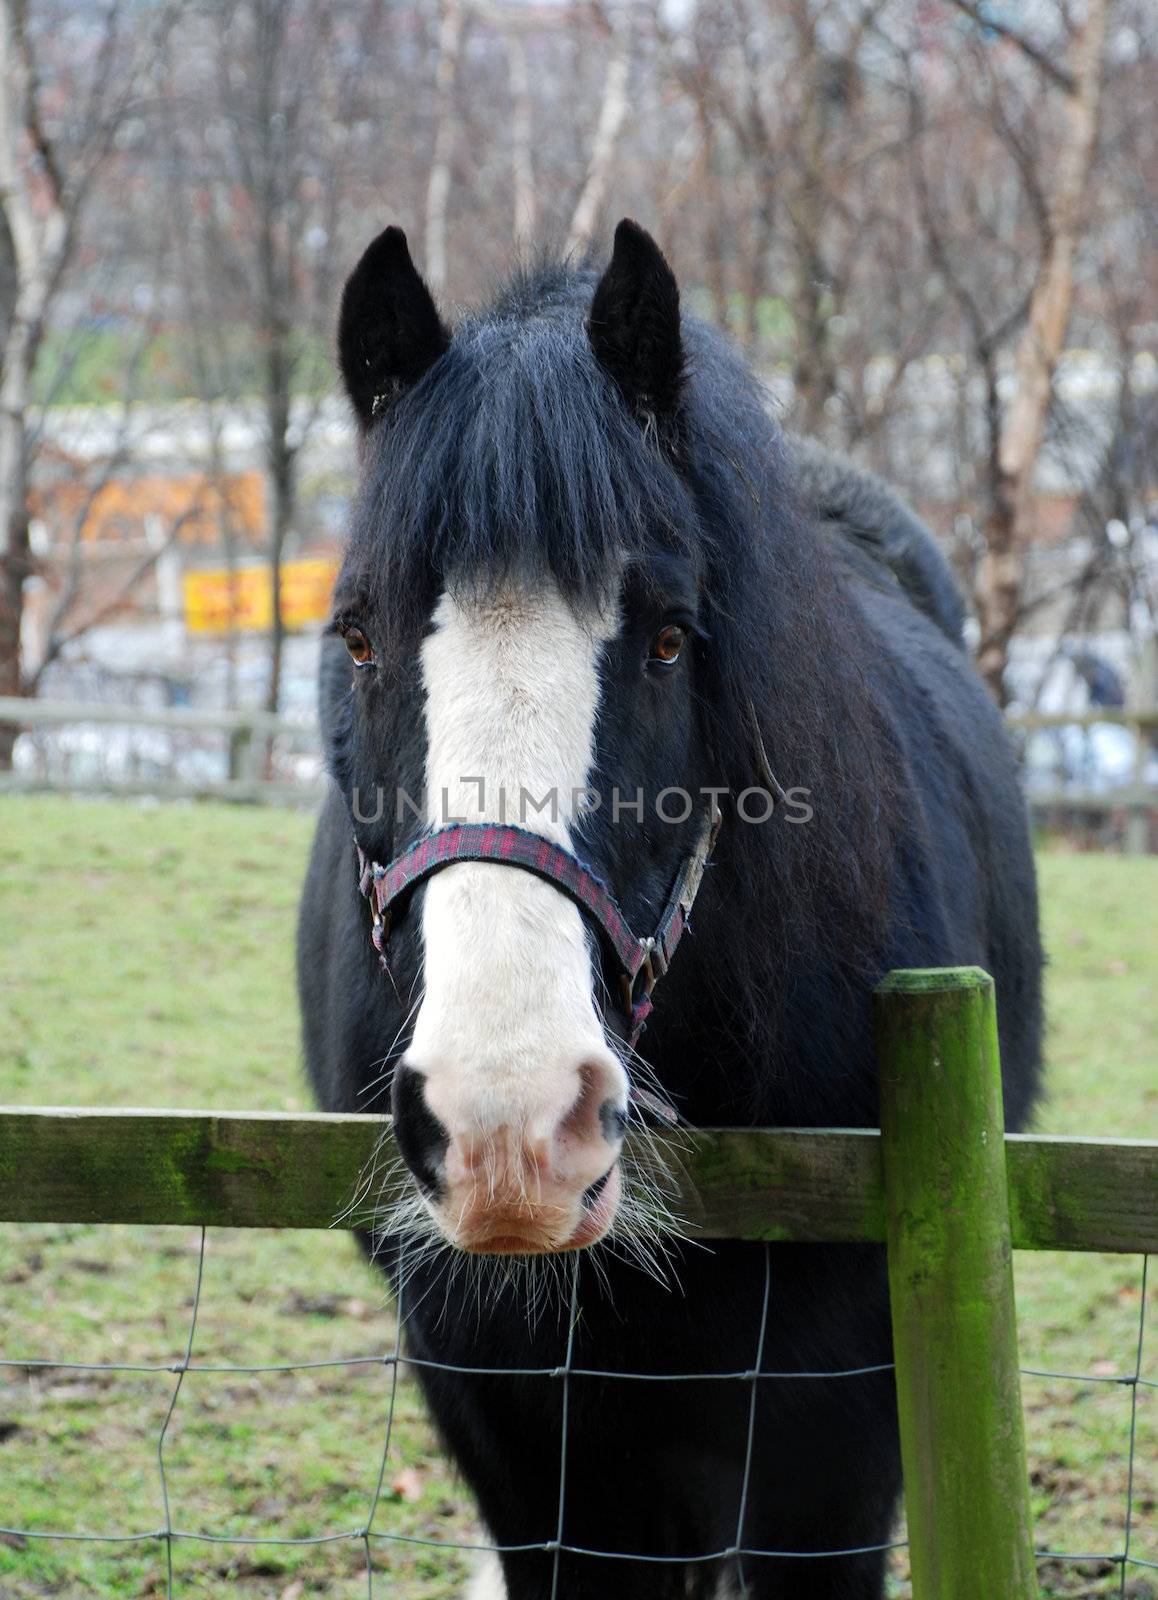 A photograph of a black and white horse behind a fence with a bridle and whiskers